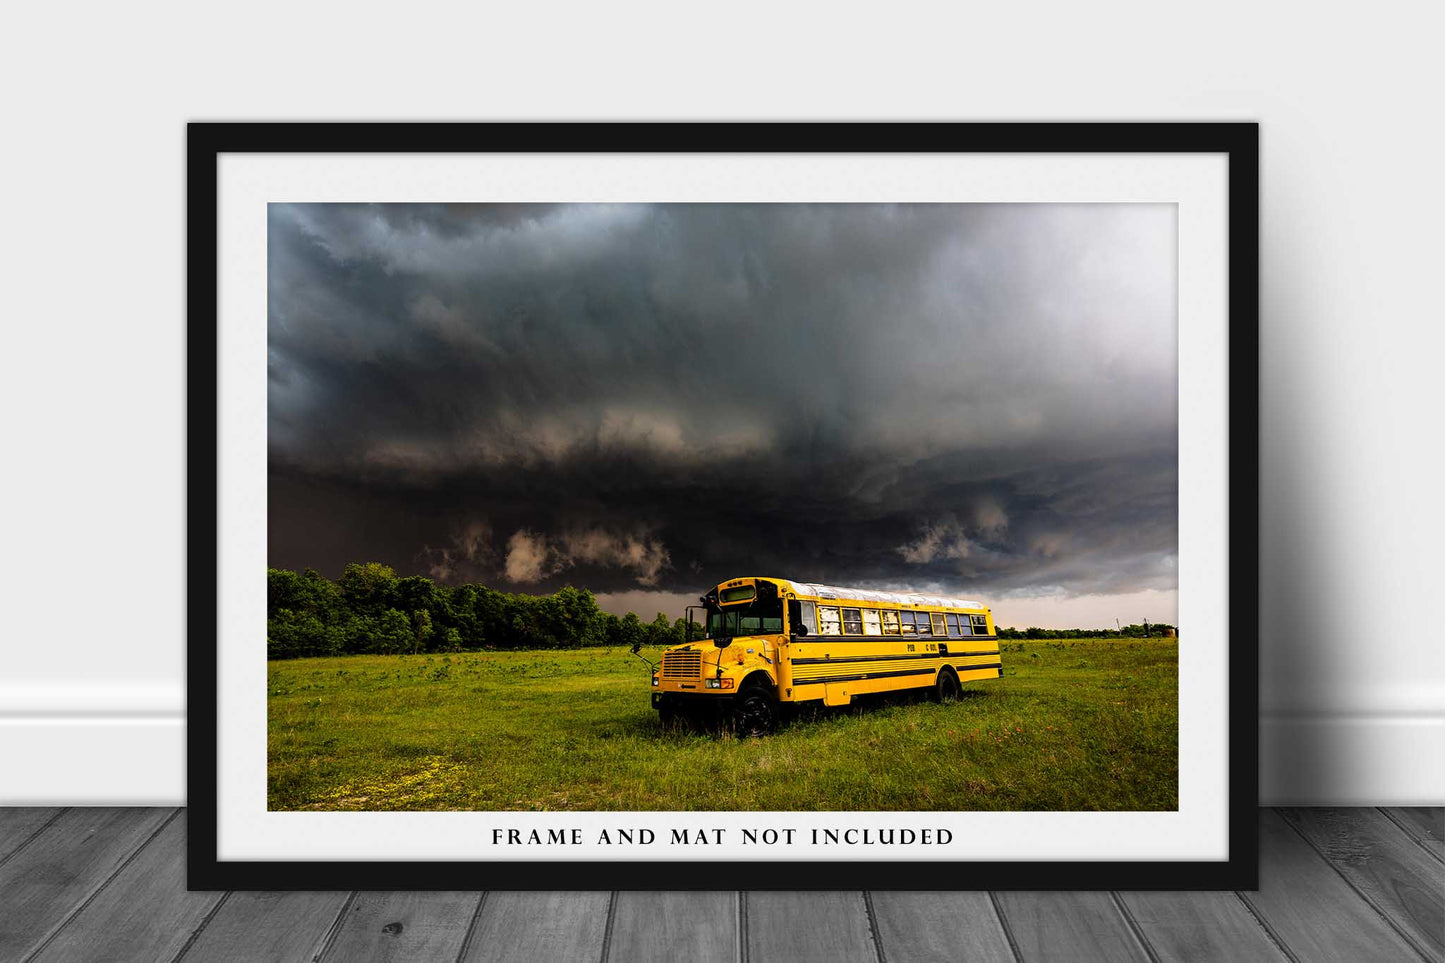 Storm Photography Print (Not Framed) Picture of Thunderstorm Over Old School Bus on Stormy Spring Day in Oklahoma Transportation Wall Art Classroom Decor